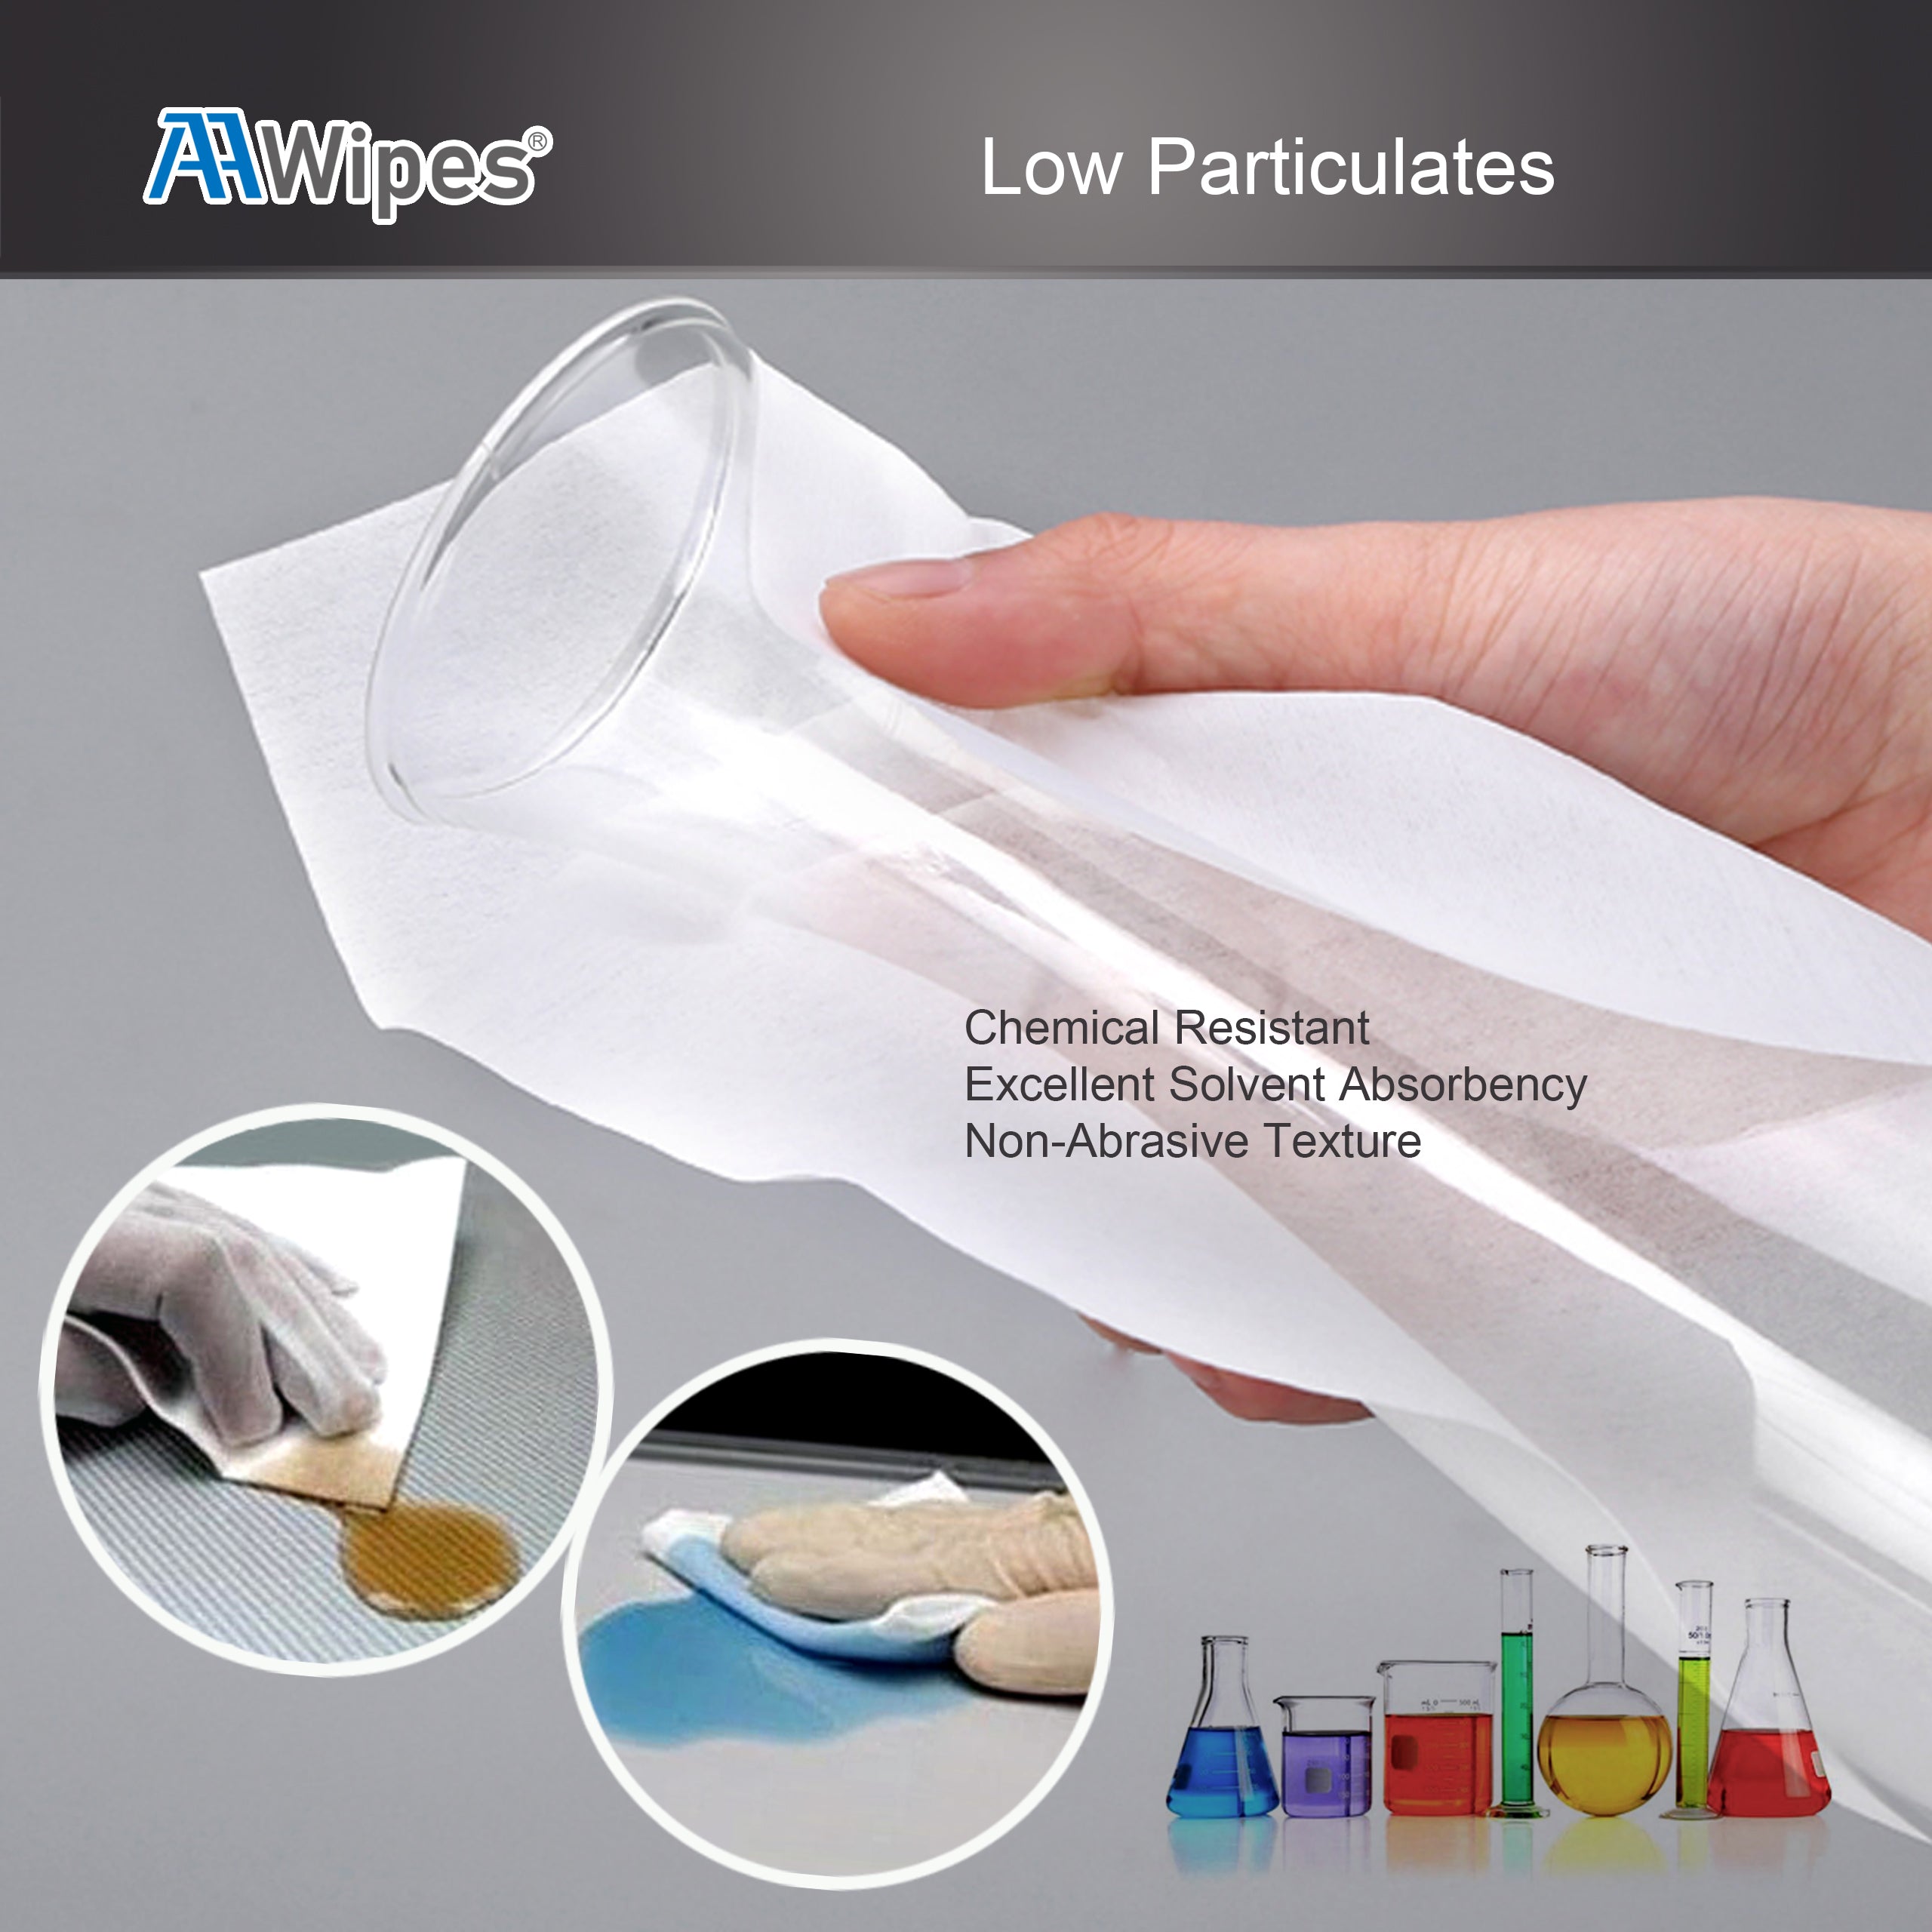 AAwipes  Nonwoven Wipes: 9"x9" Cellulose/Polyester Blend. Starts with 4,200 wipes/box in 14 bags (No. NW06809).